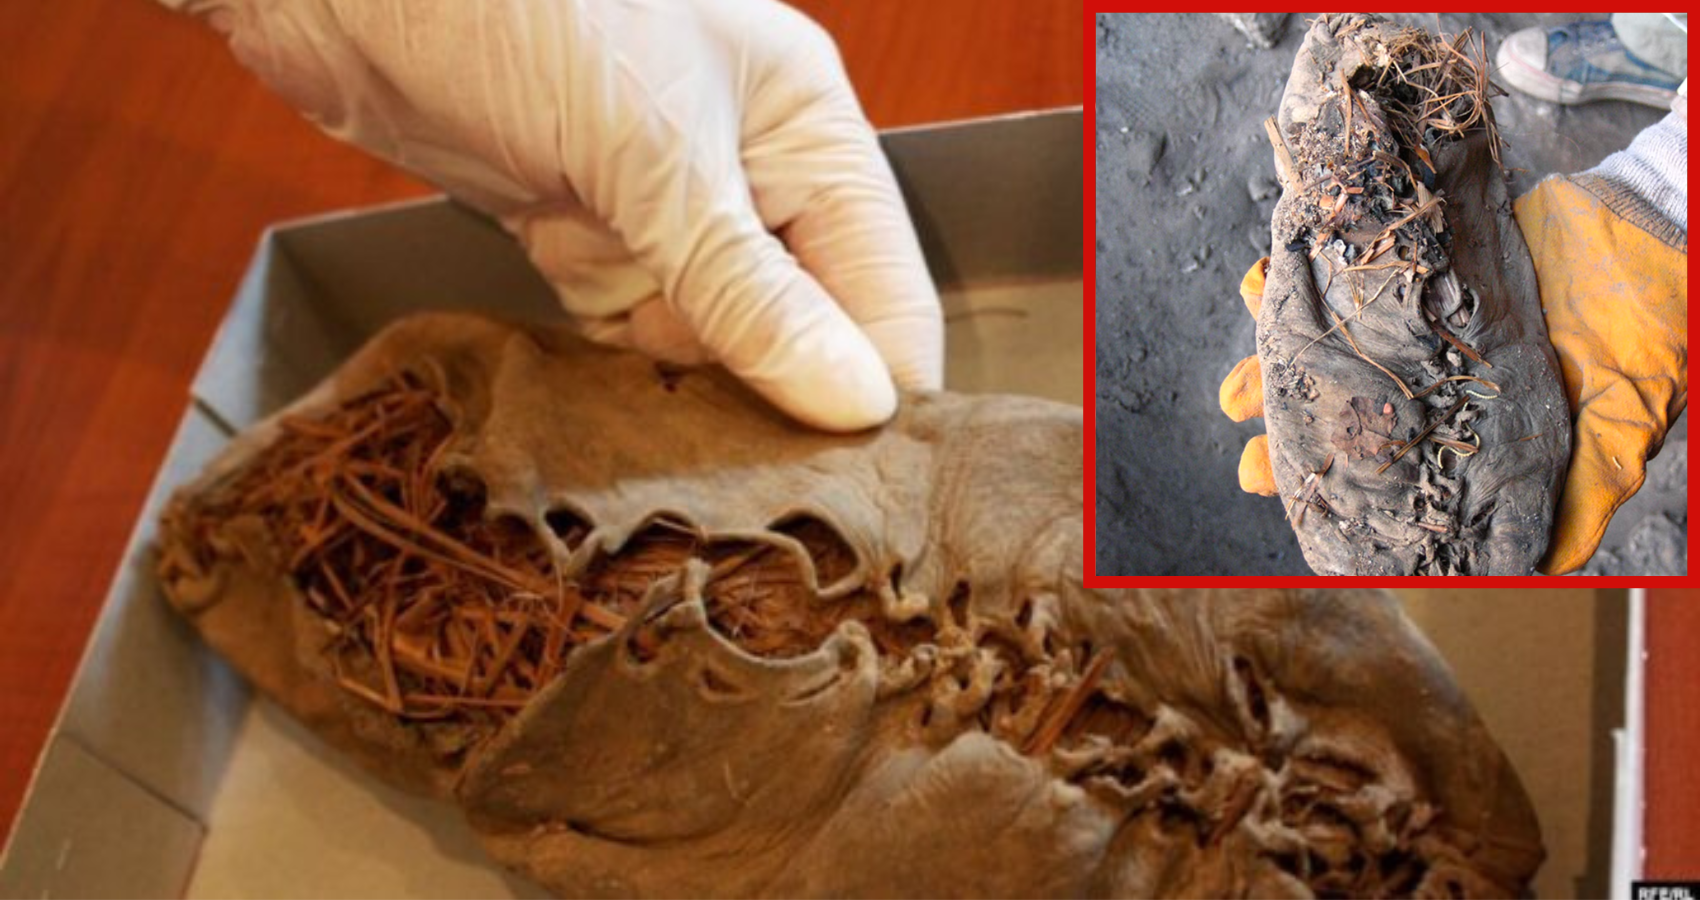 World’s oldest leather shoe which is 1,000 years older than the Great Pyramid.